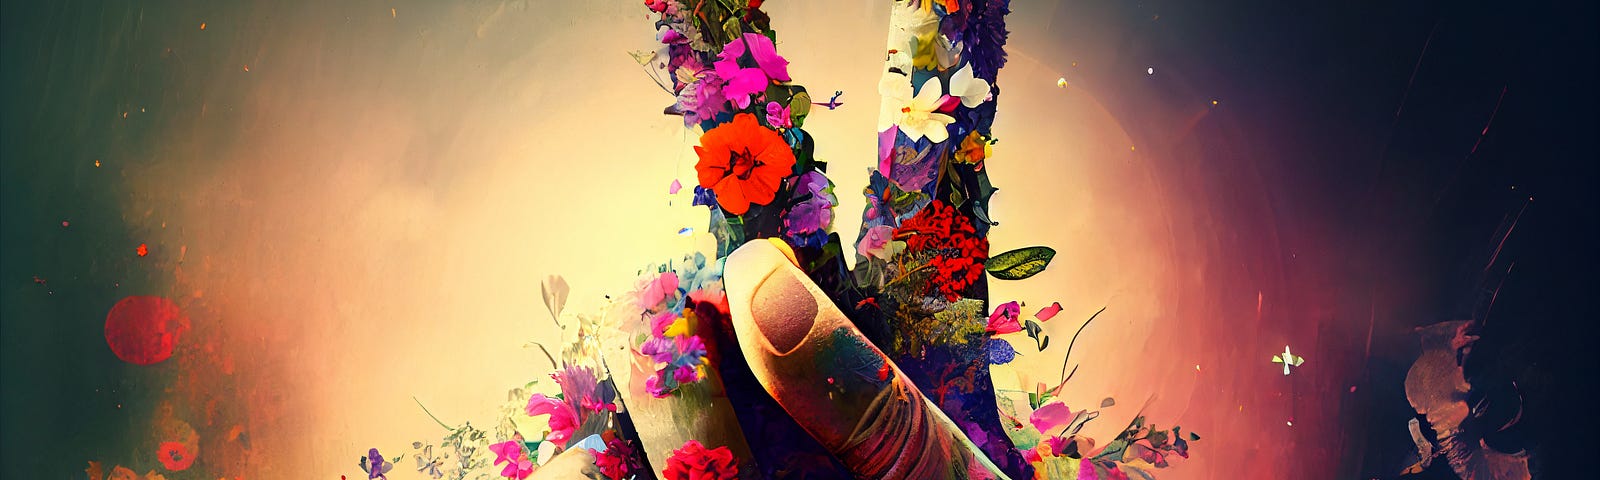 Isolated hand making the peace sign, decorated with colorful flowers